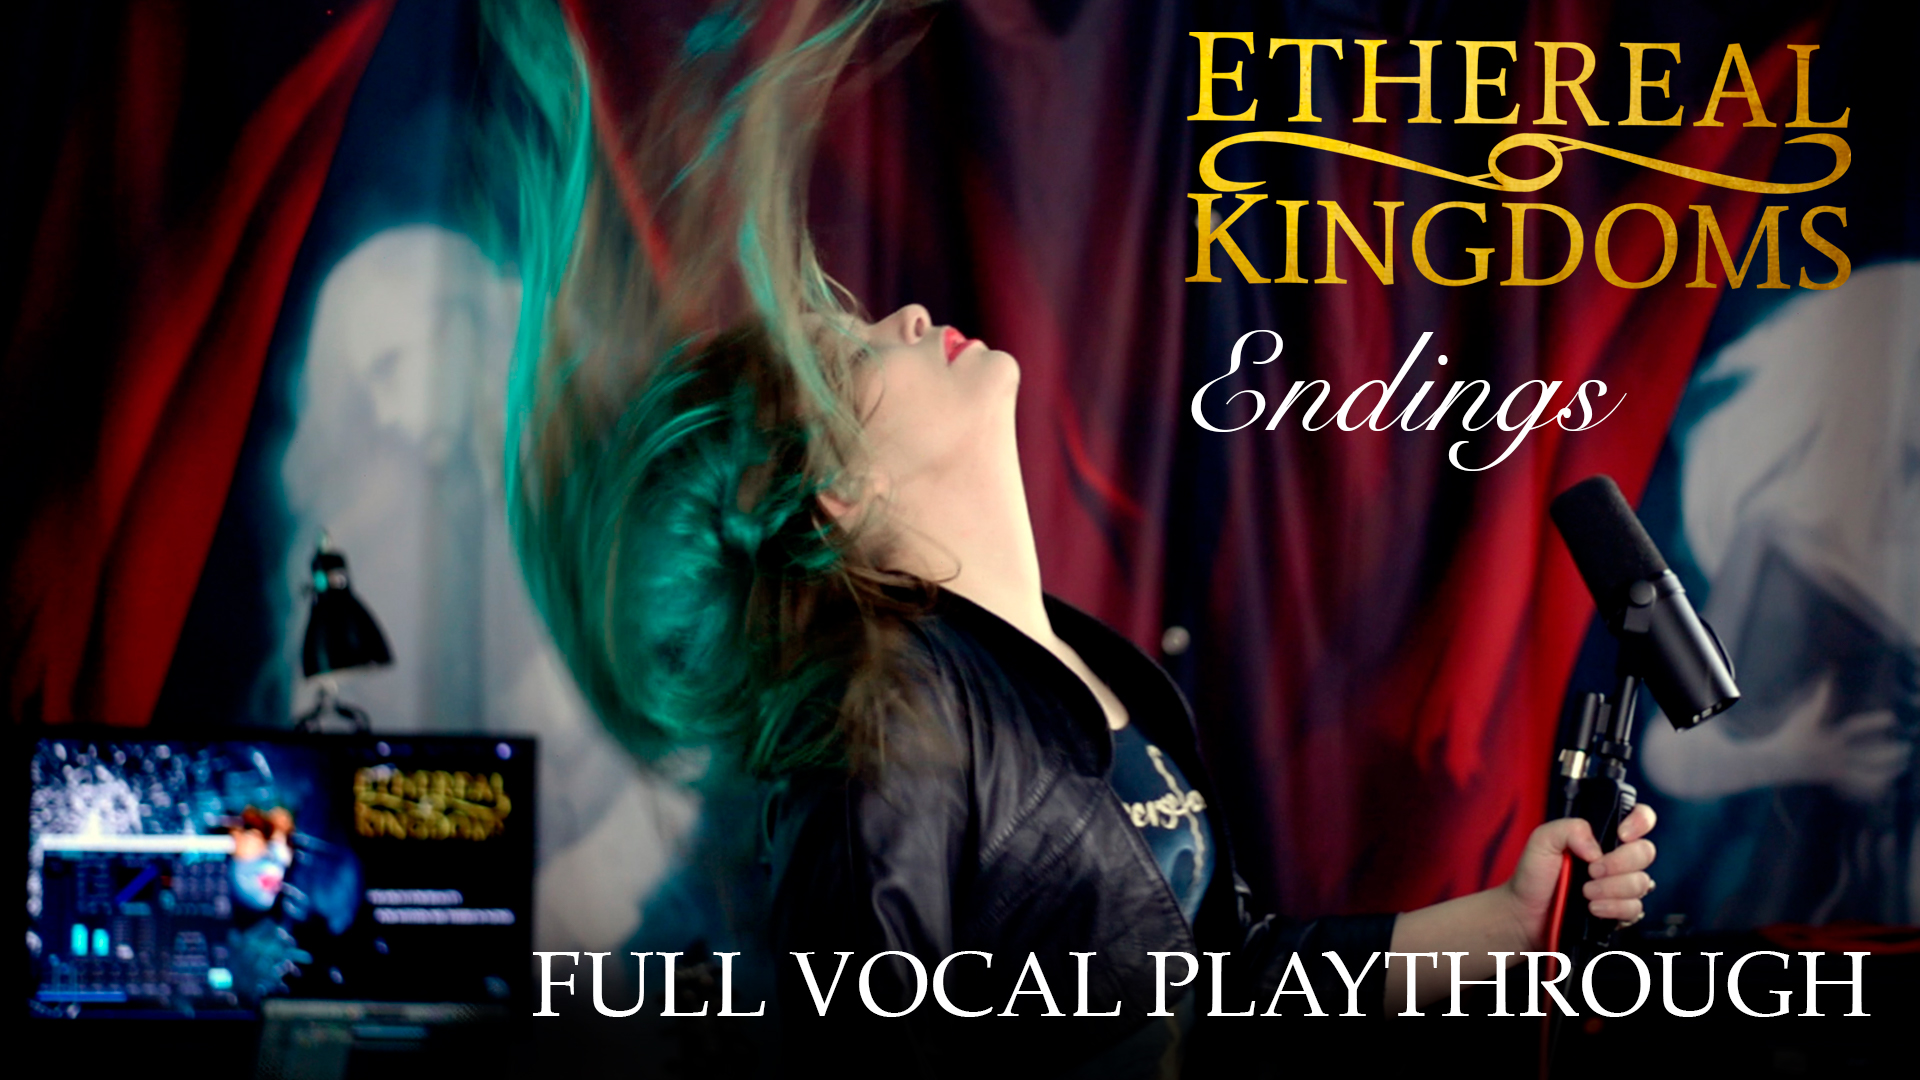 Ethereal Kingdoms Endings full vocal playthrough video out now on youtube